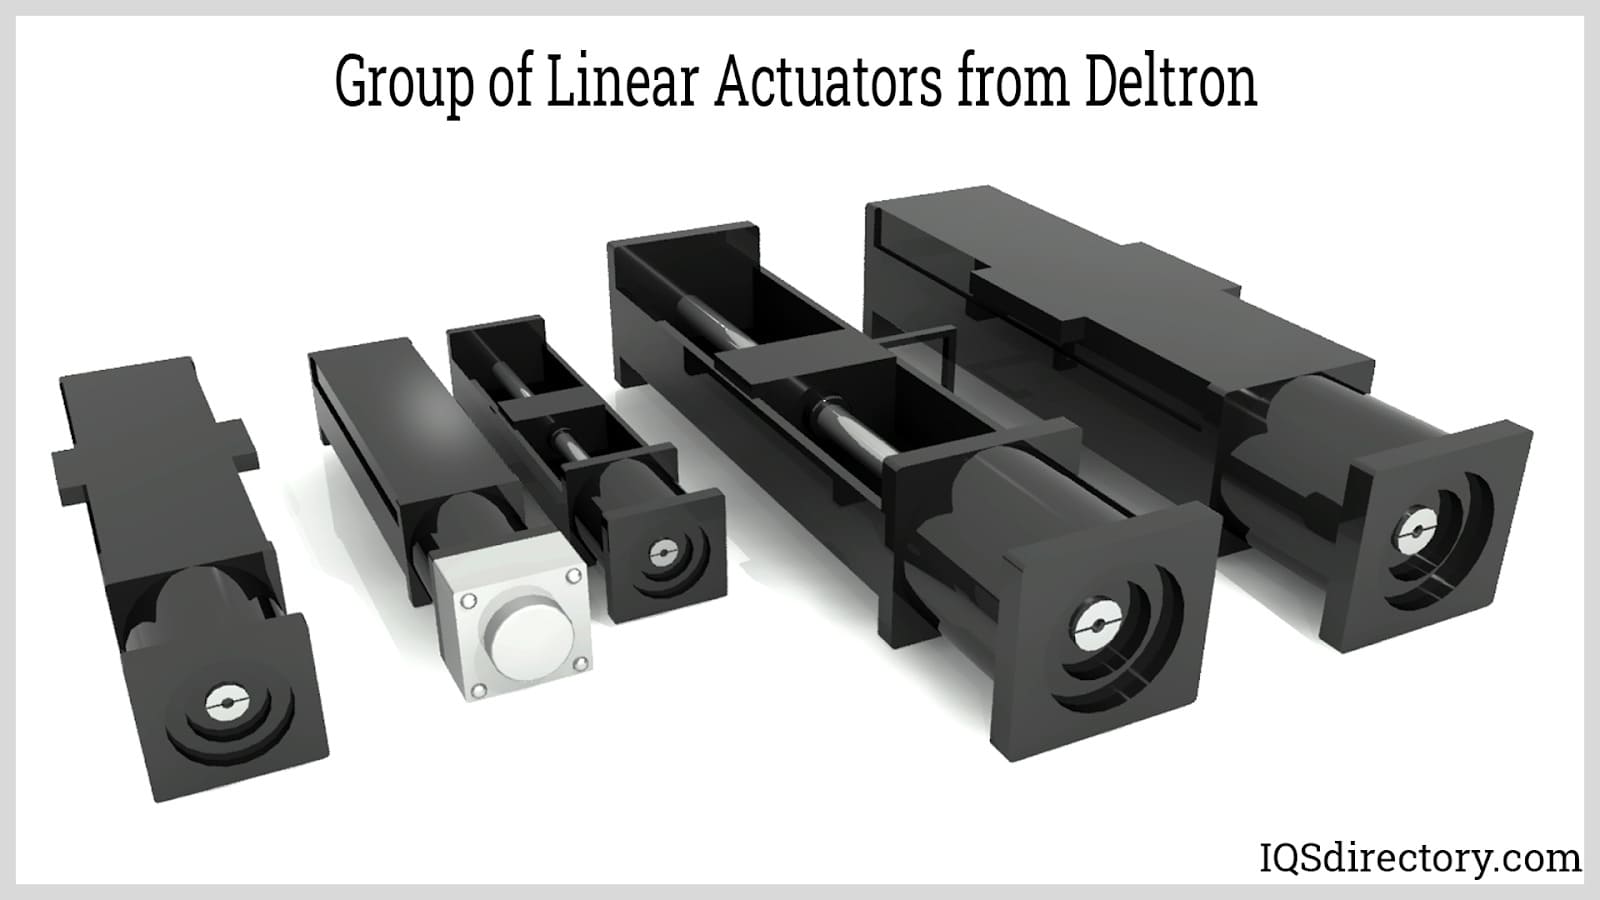 Group of Linear Actuators